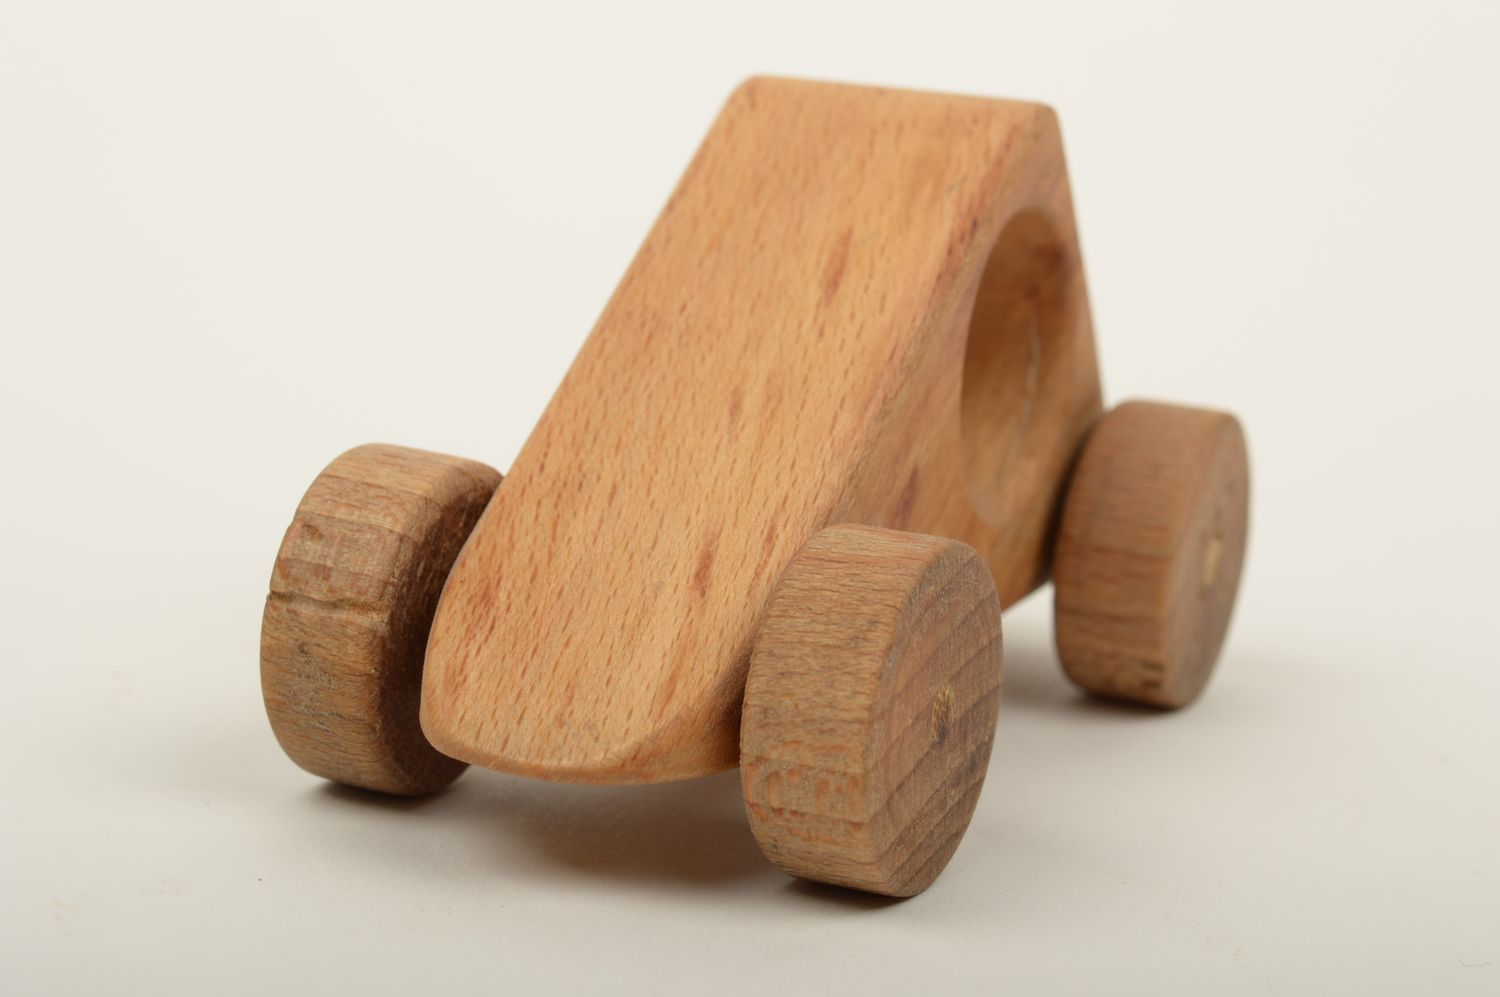 Handmade wooden toy wheeled toy for boys birthday gift ideas for kids photo 2